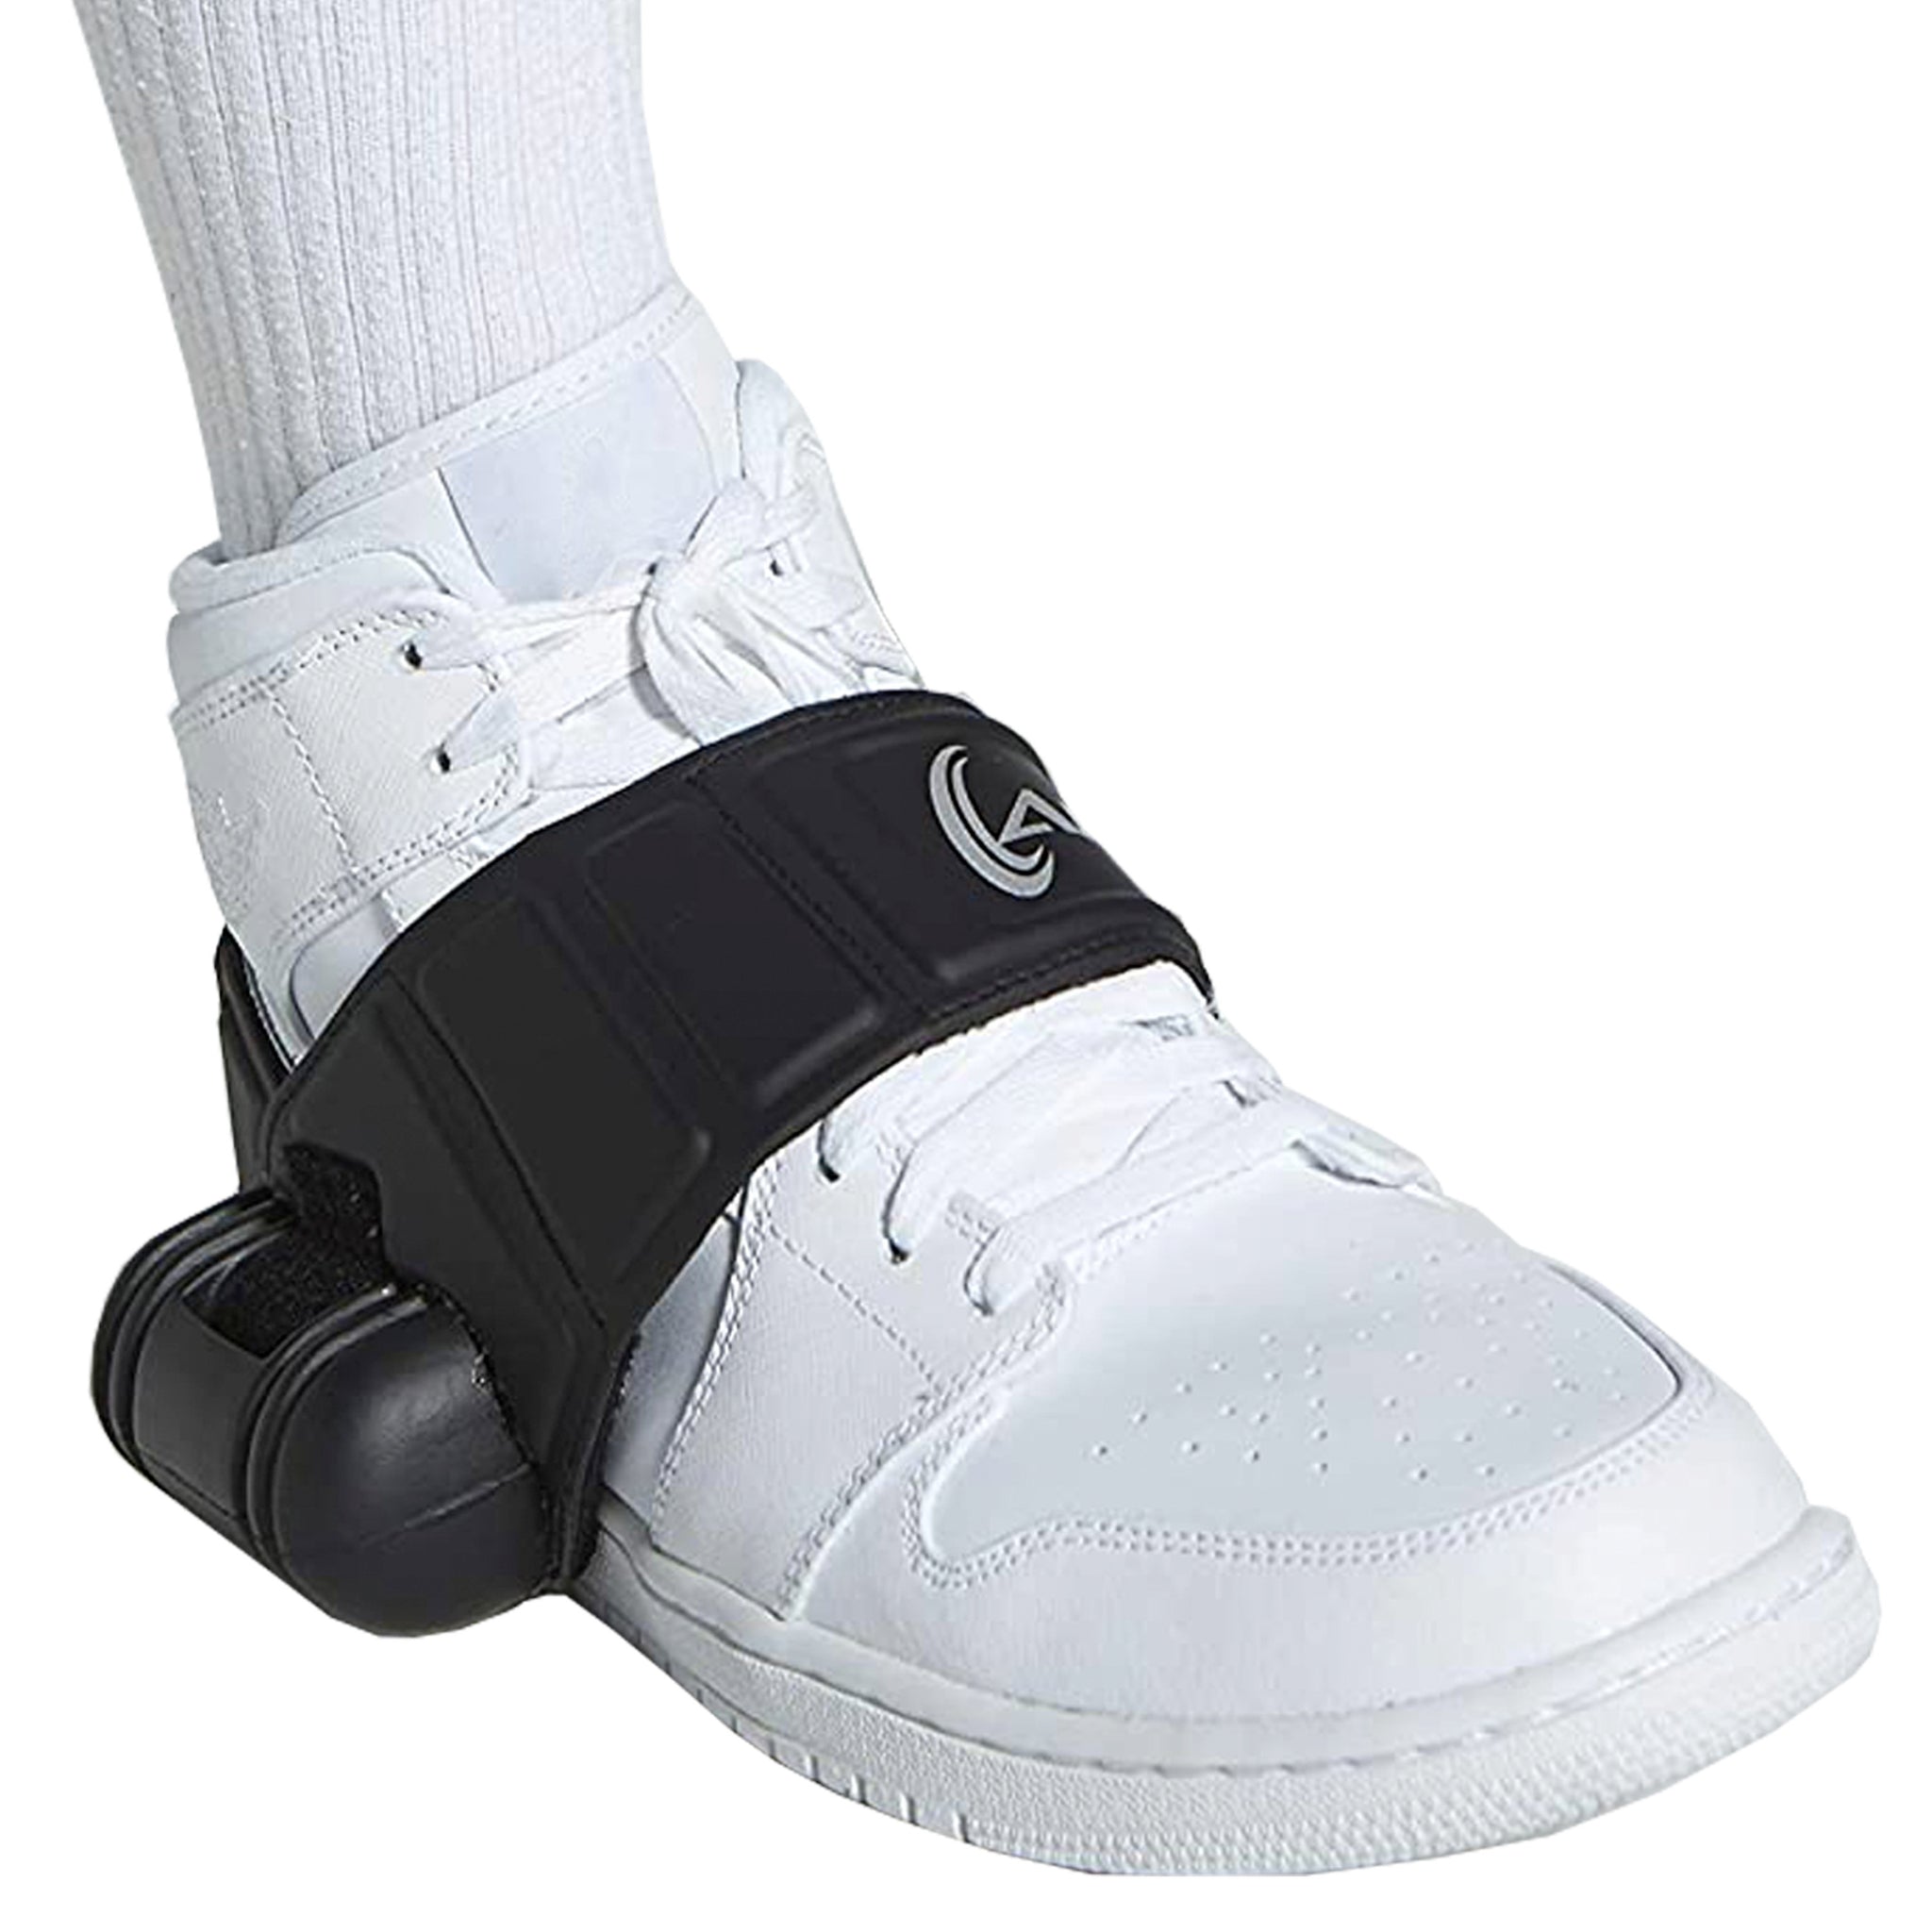 --2090 Ankle Roll Guard Product Image 1--